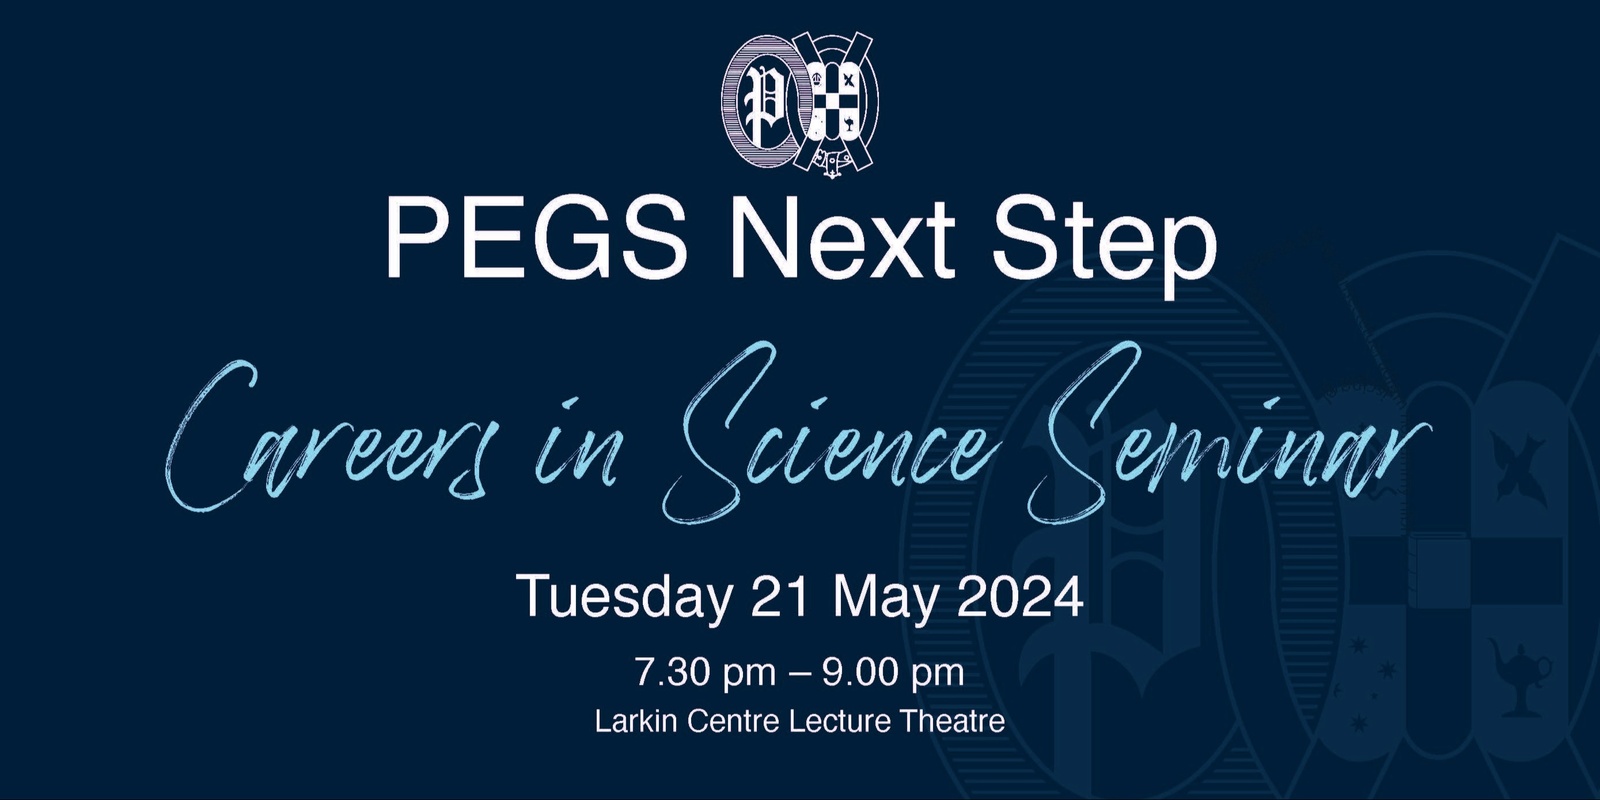 Banner image for PEGS Next Step: Careers in Science Seminar